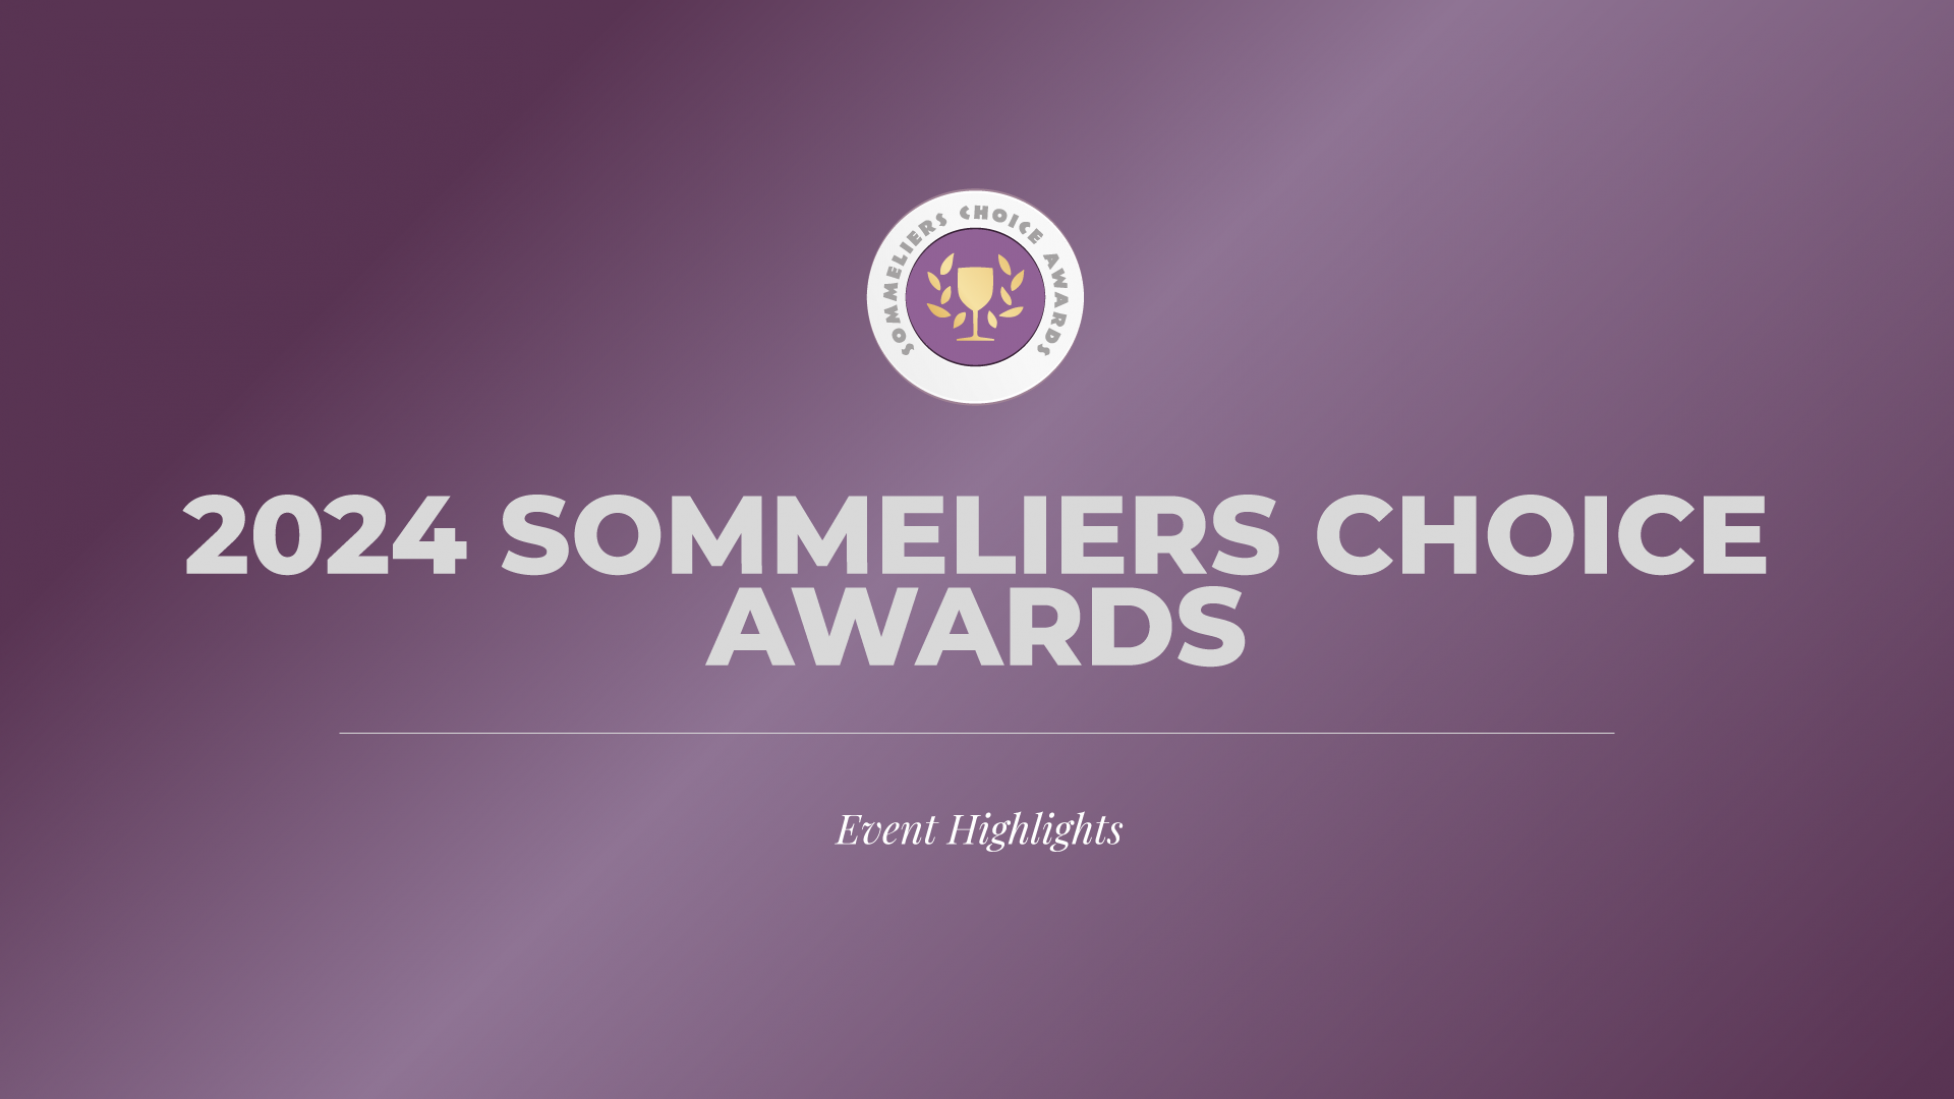 Photo for: 2024 Sommeliers Choice Awards